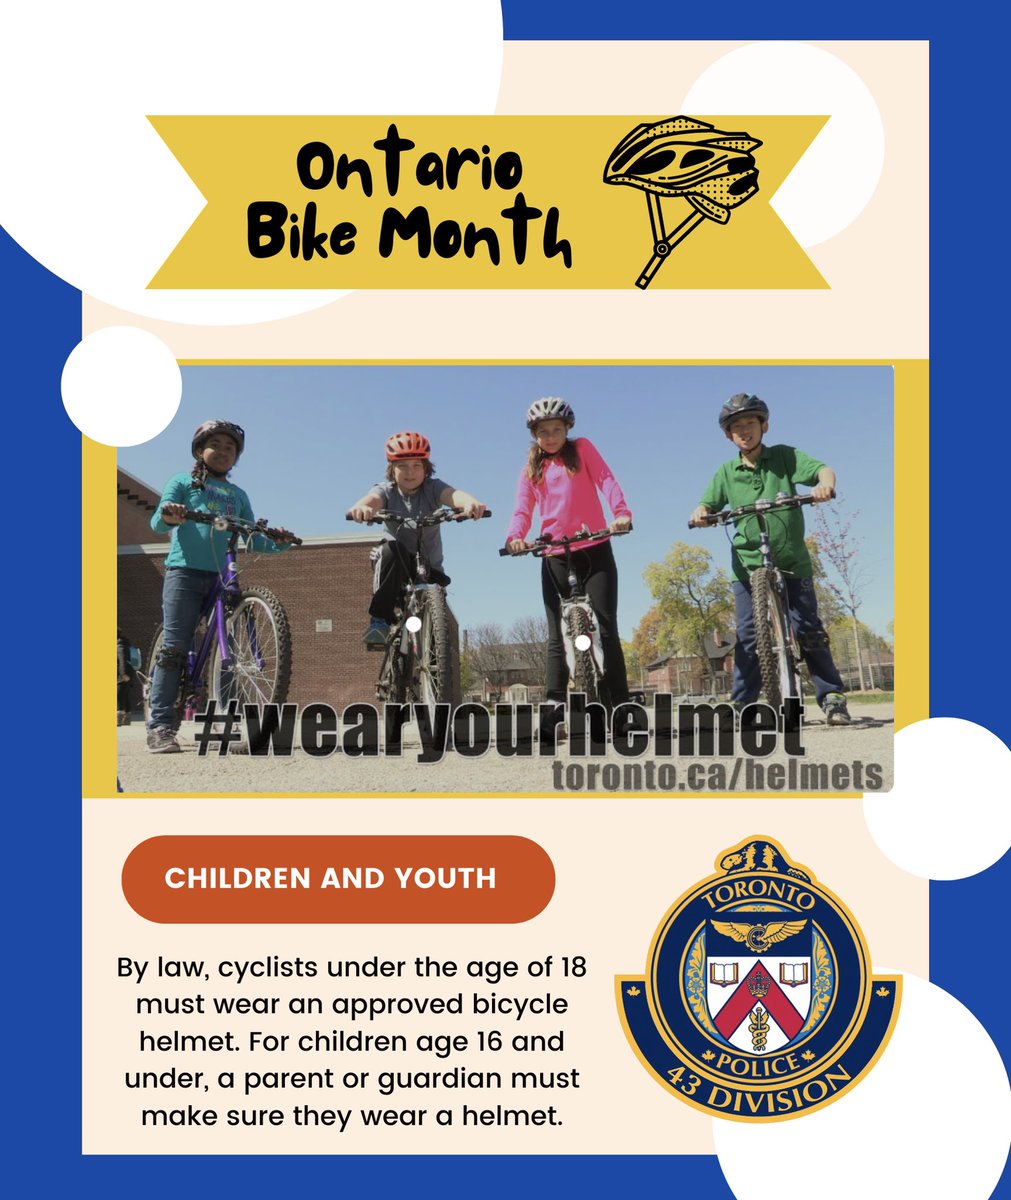 Bike Month runs from May 30th – June 30th this year. This is a great time to have a refresher on some of the safety laws we have in Ontario. #helmet #bikesafety #bikemonth Check the comments for more info on helmet safety and stay tuned for more this month on bike laws👇🏼